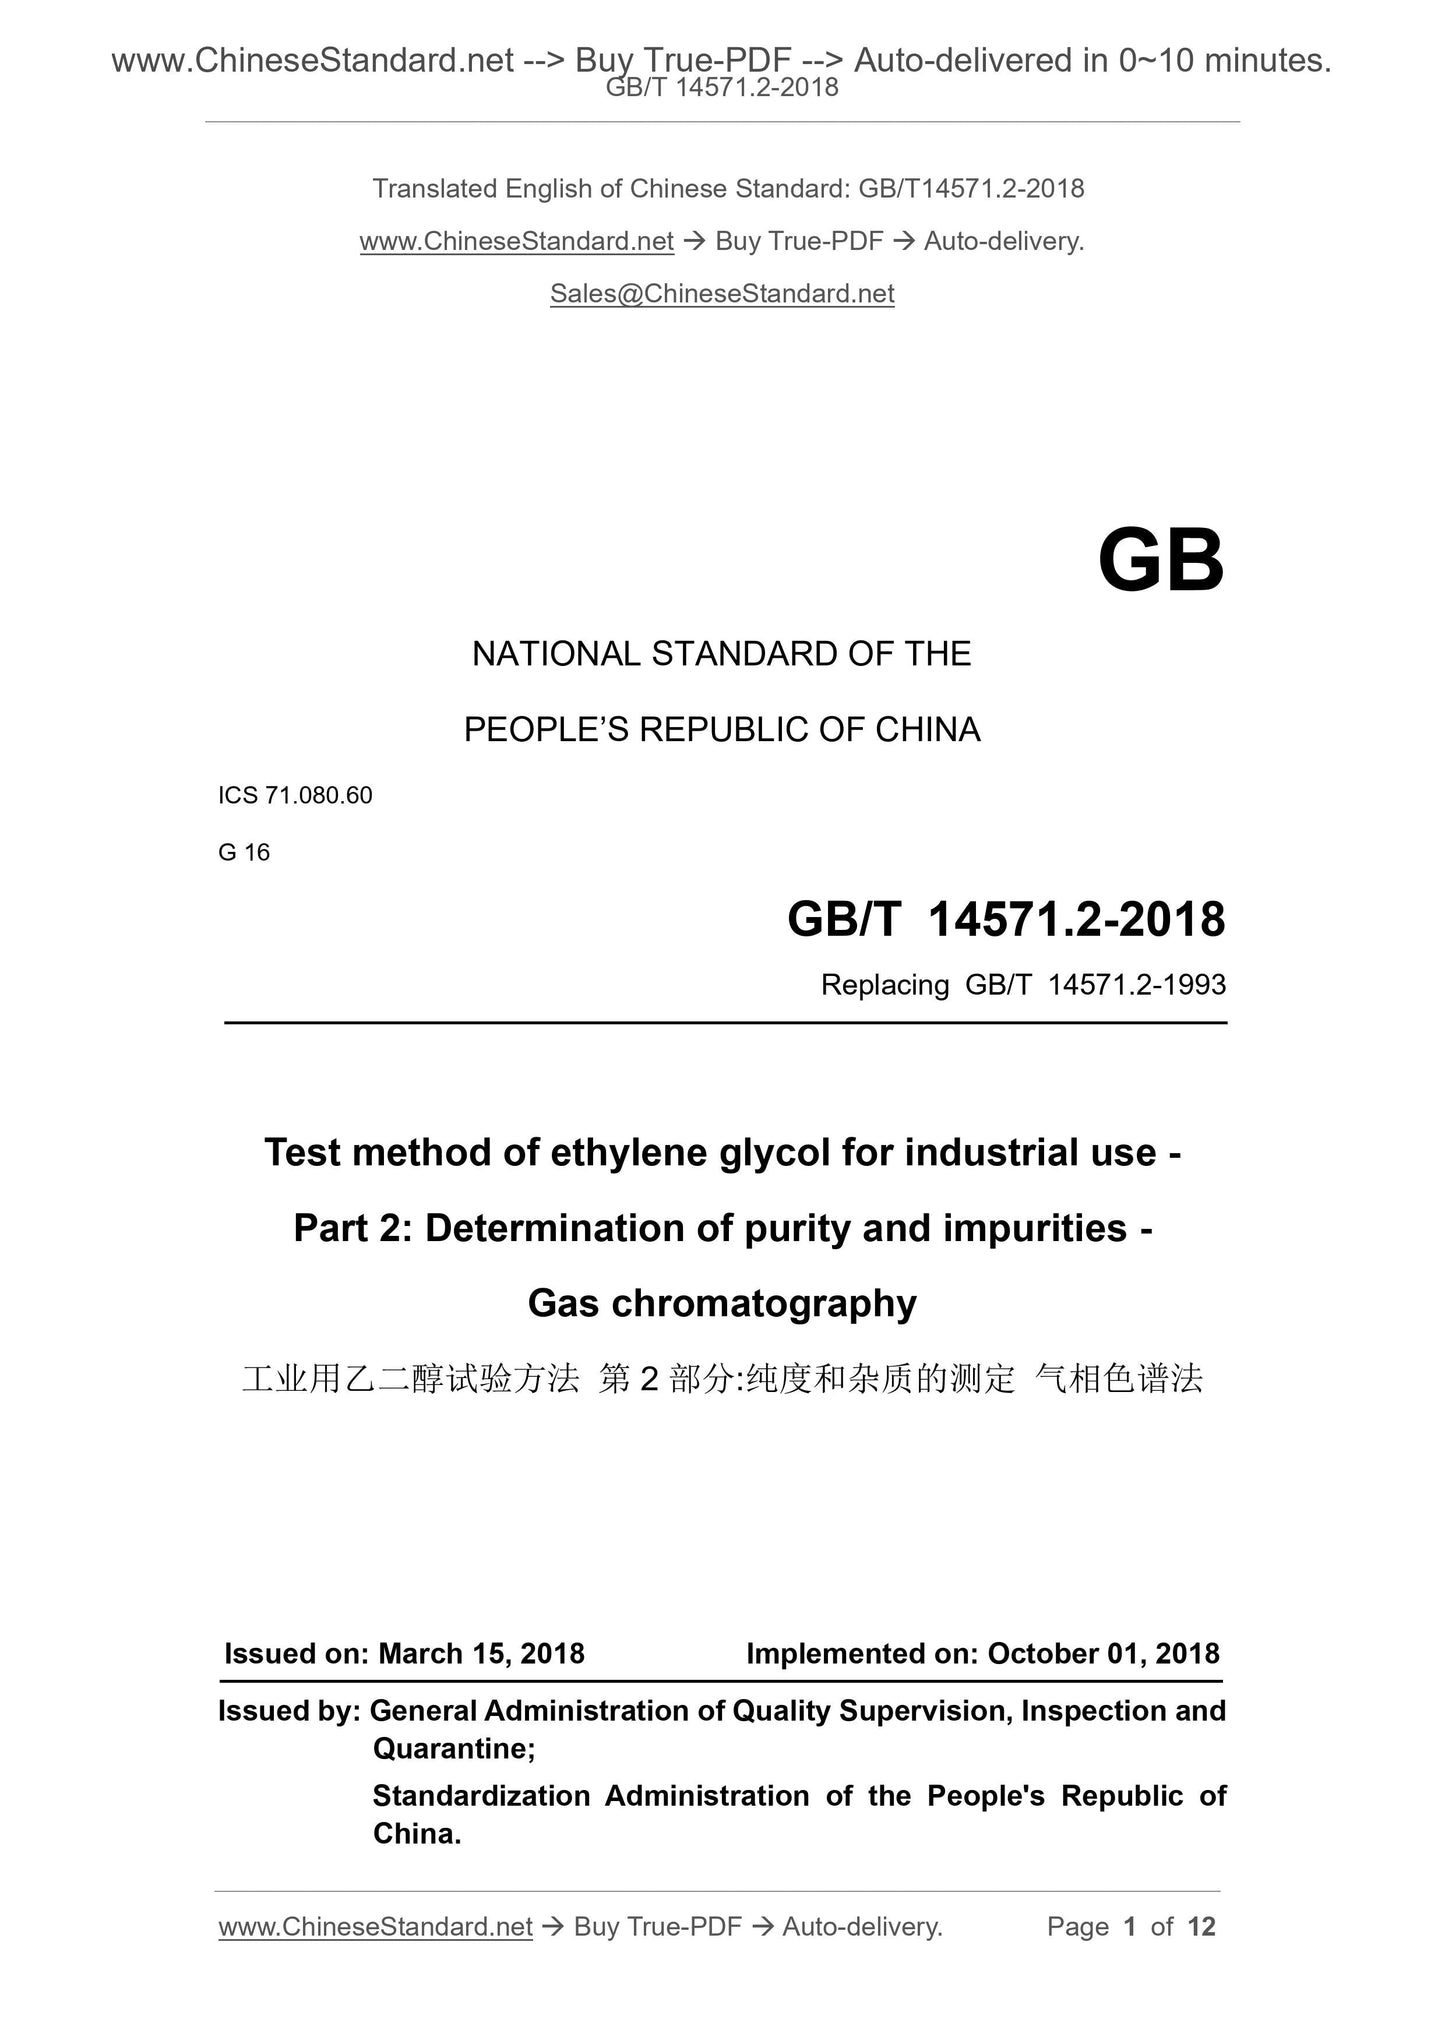 GB/T 14571.2-2018 Page 1